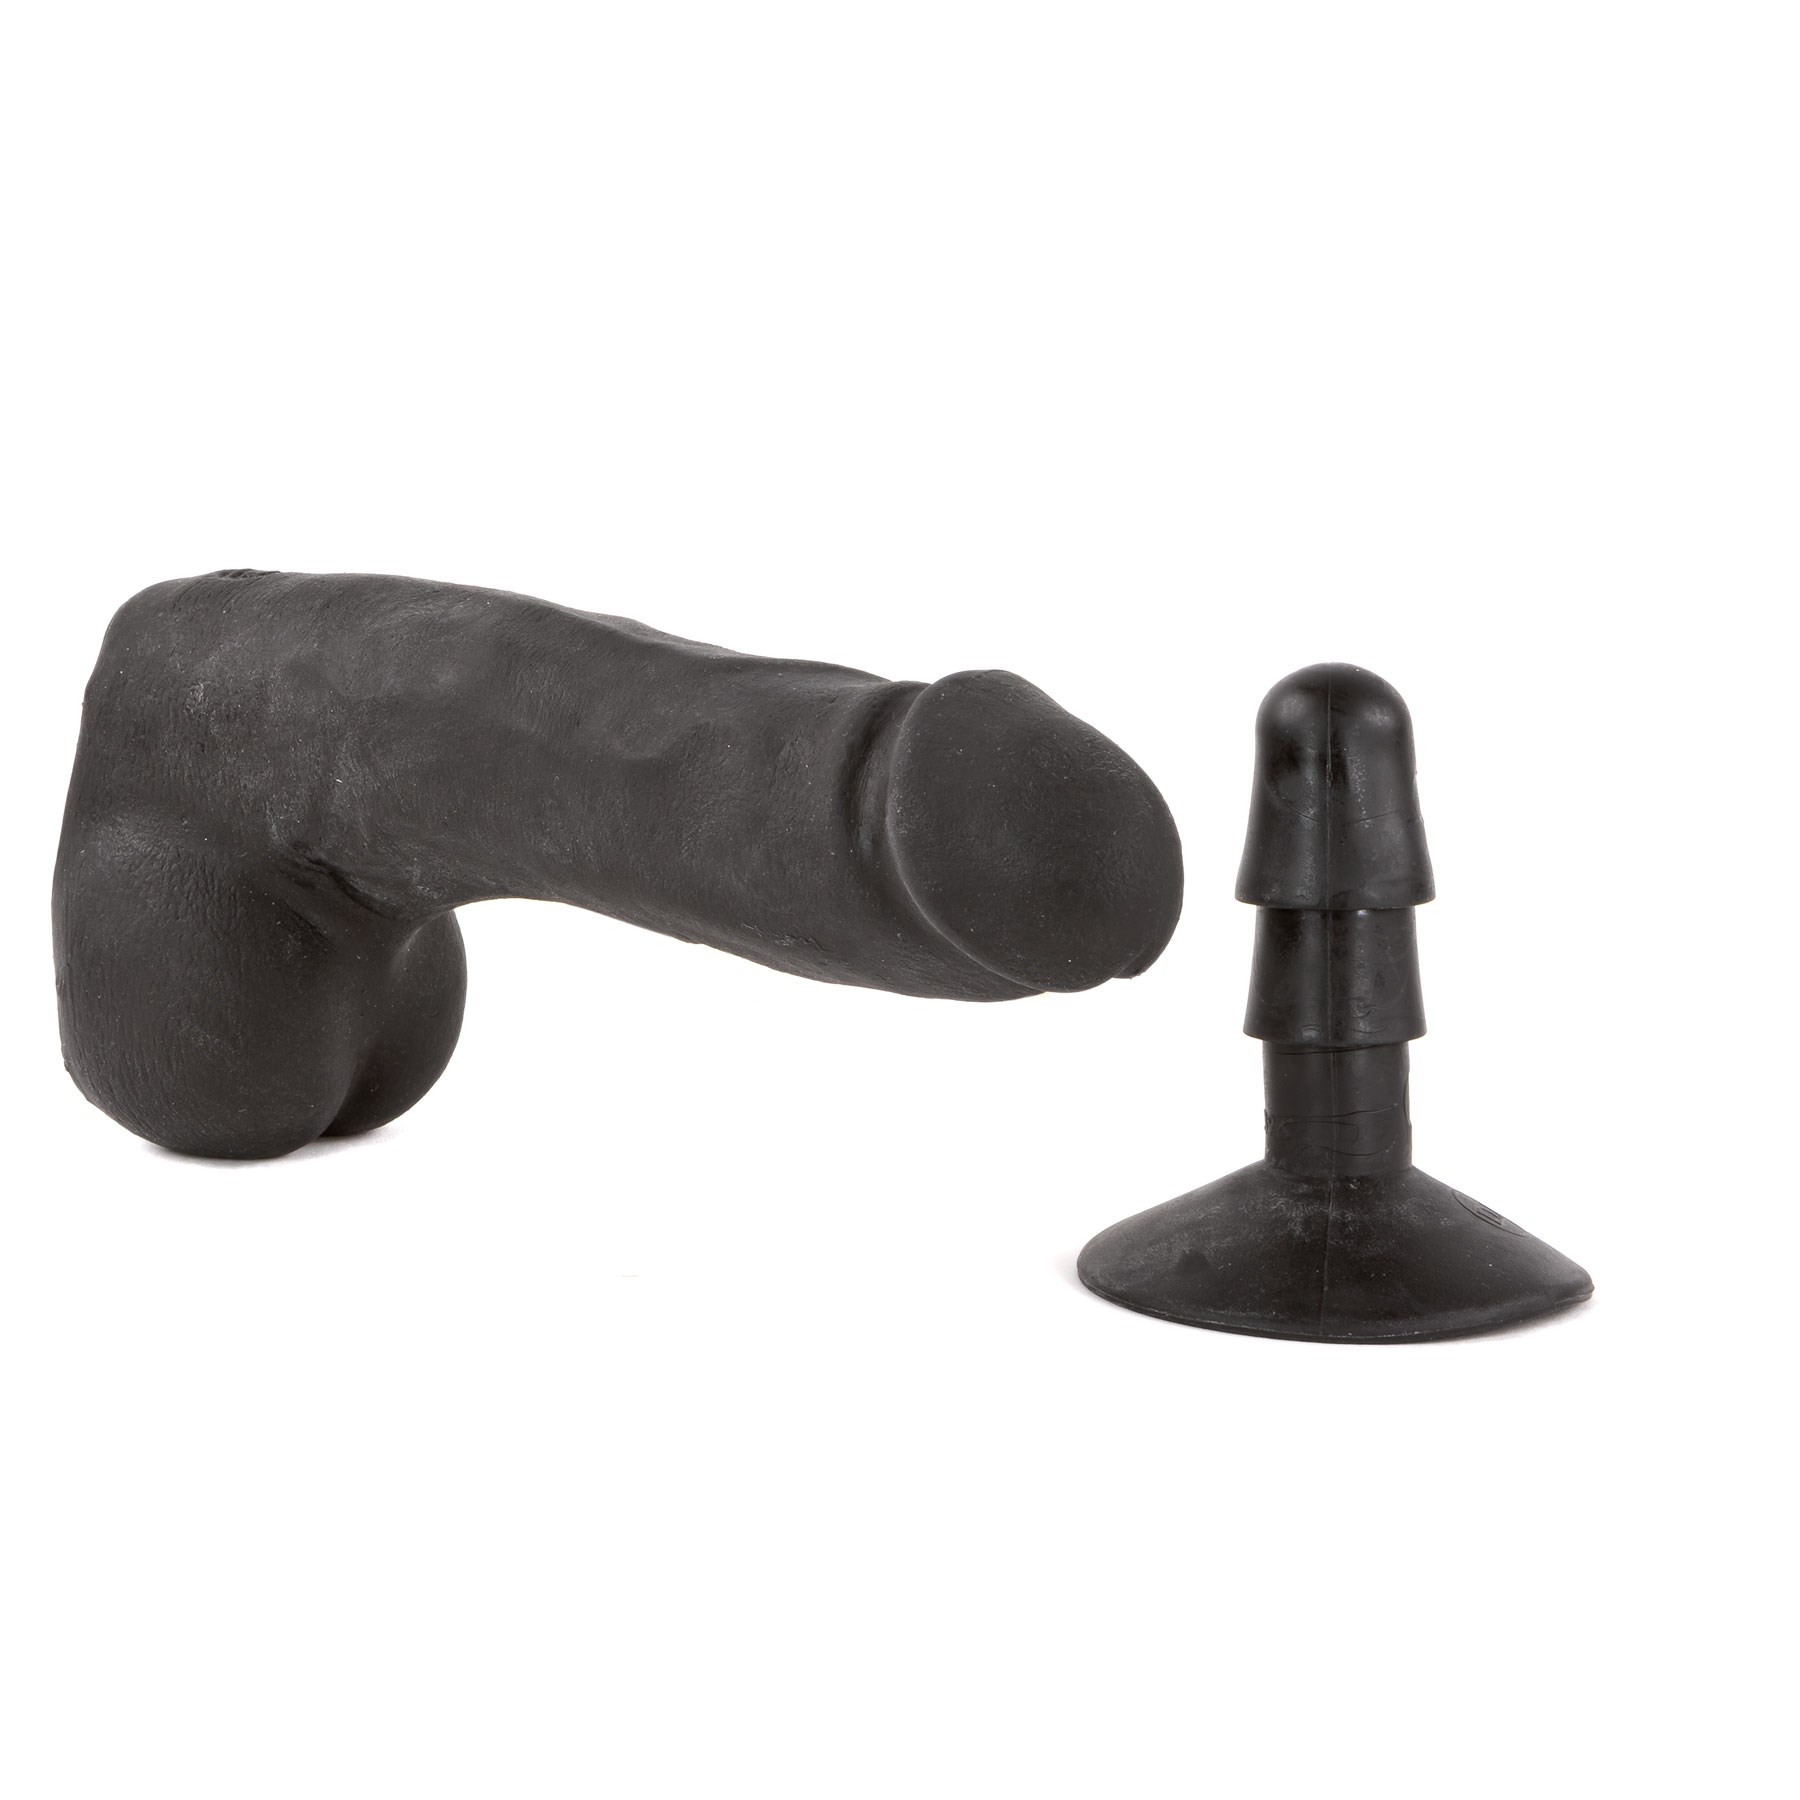 Kink Perfect Dual Density Penis with removeable suction cup